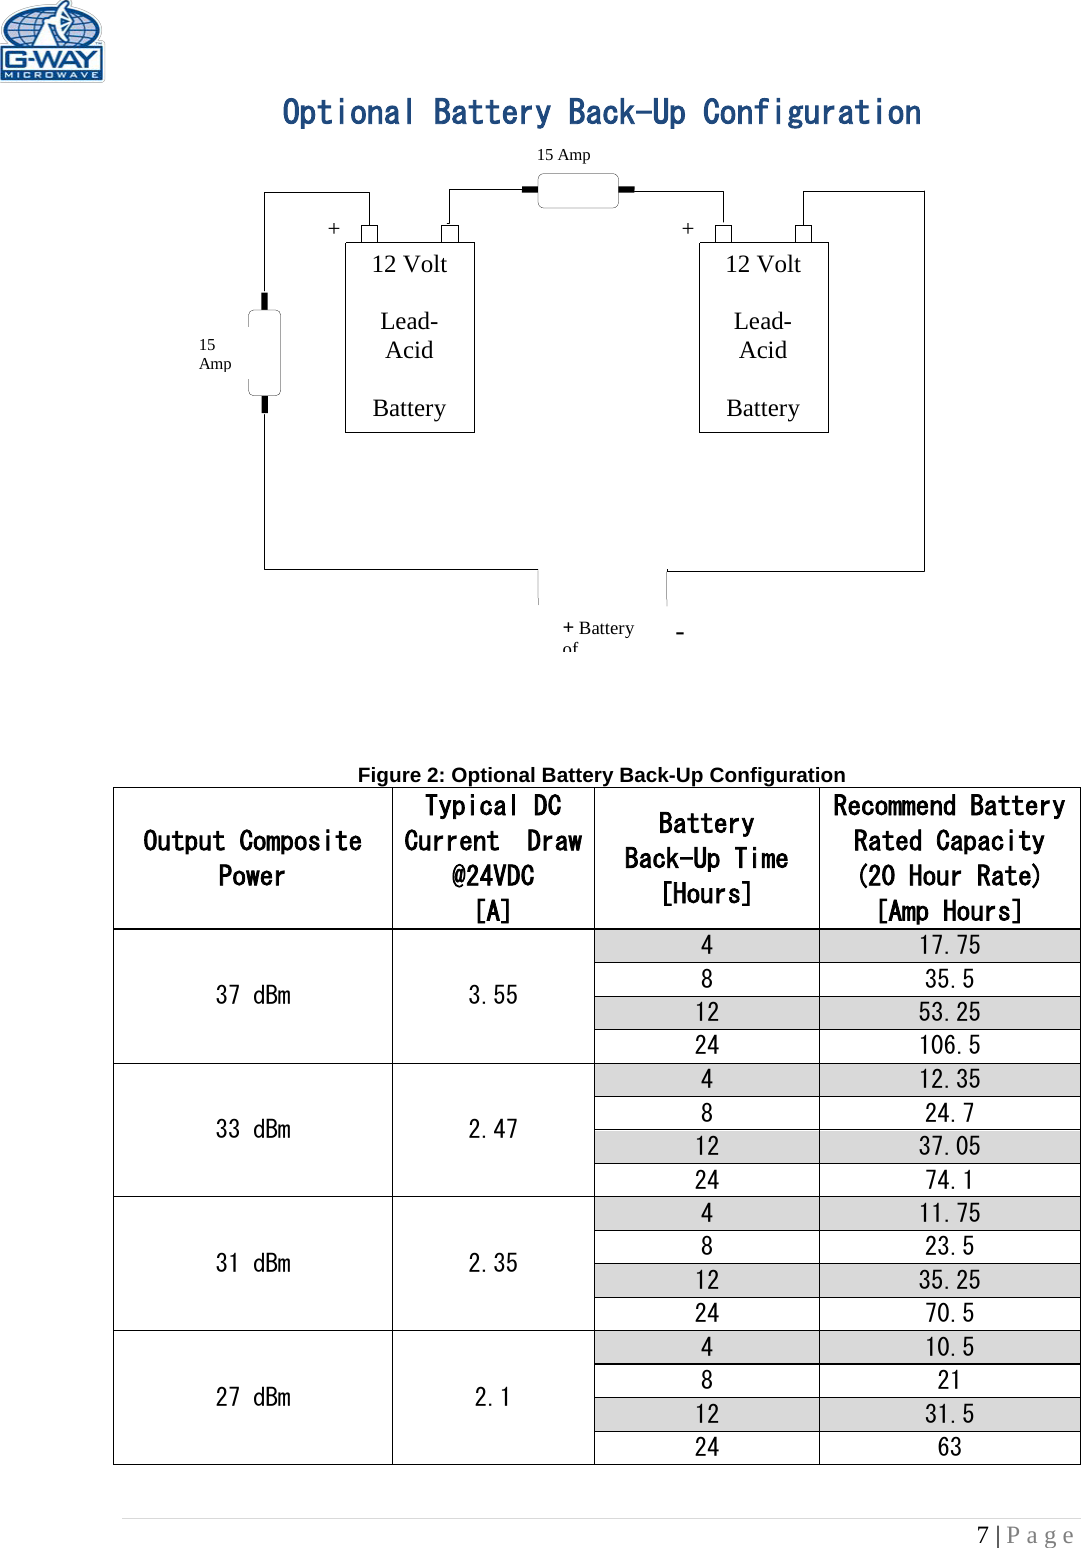   7 | Page  15 Amp  15 Amp       12 Volt  Lead-Acid  Battery  12 Volt  Lead-Acid  Battery  + + + Battery of   - Optional Battery Back-Up Configuration                  Figure 2: Optional Battery Back-Up Configuration Output Composite Power Typical DC Current  Draw @24VDC [A] Battery Back-Up Time [Hours] Recommend Battery Rated Capacity (20 Hour Rate) [Amp Hours] 37 dBm  3.55 4  17.75 8  35.5 12  53.25 24  106.5 33 dBm  2.47 4  12.35 8  24.7 12  37.05 24  74.1 31 dBm  2.35 4  11.75 8  23.5 12  35.25 24  70.5 27 dBm  2.1 4  10.5 8  21 12  31.5 24  63  